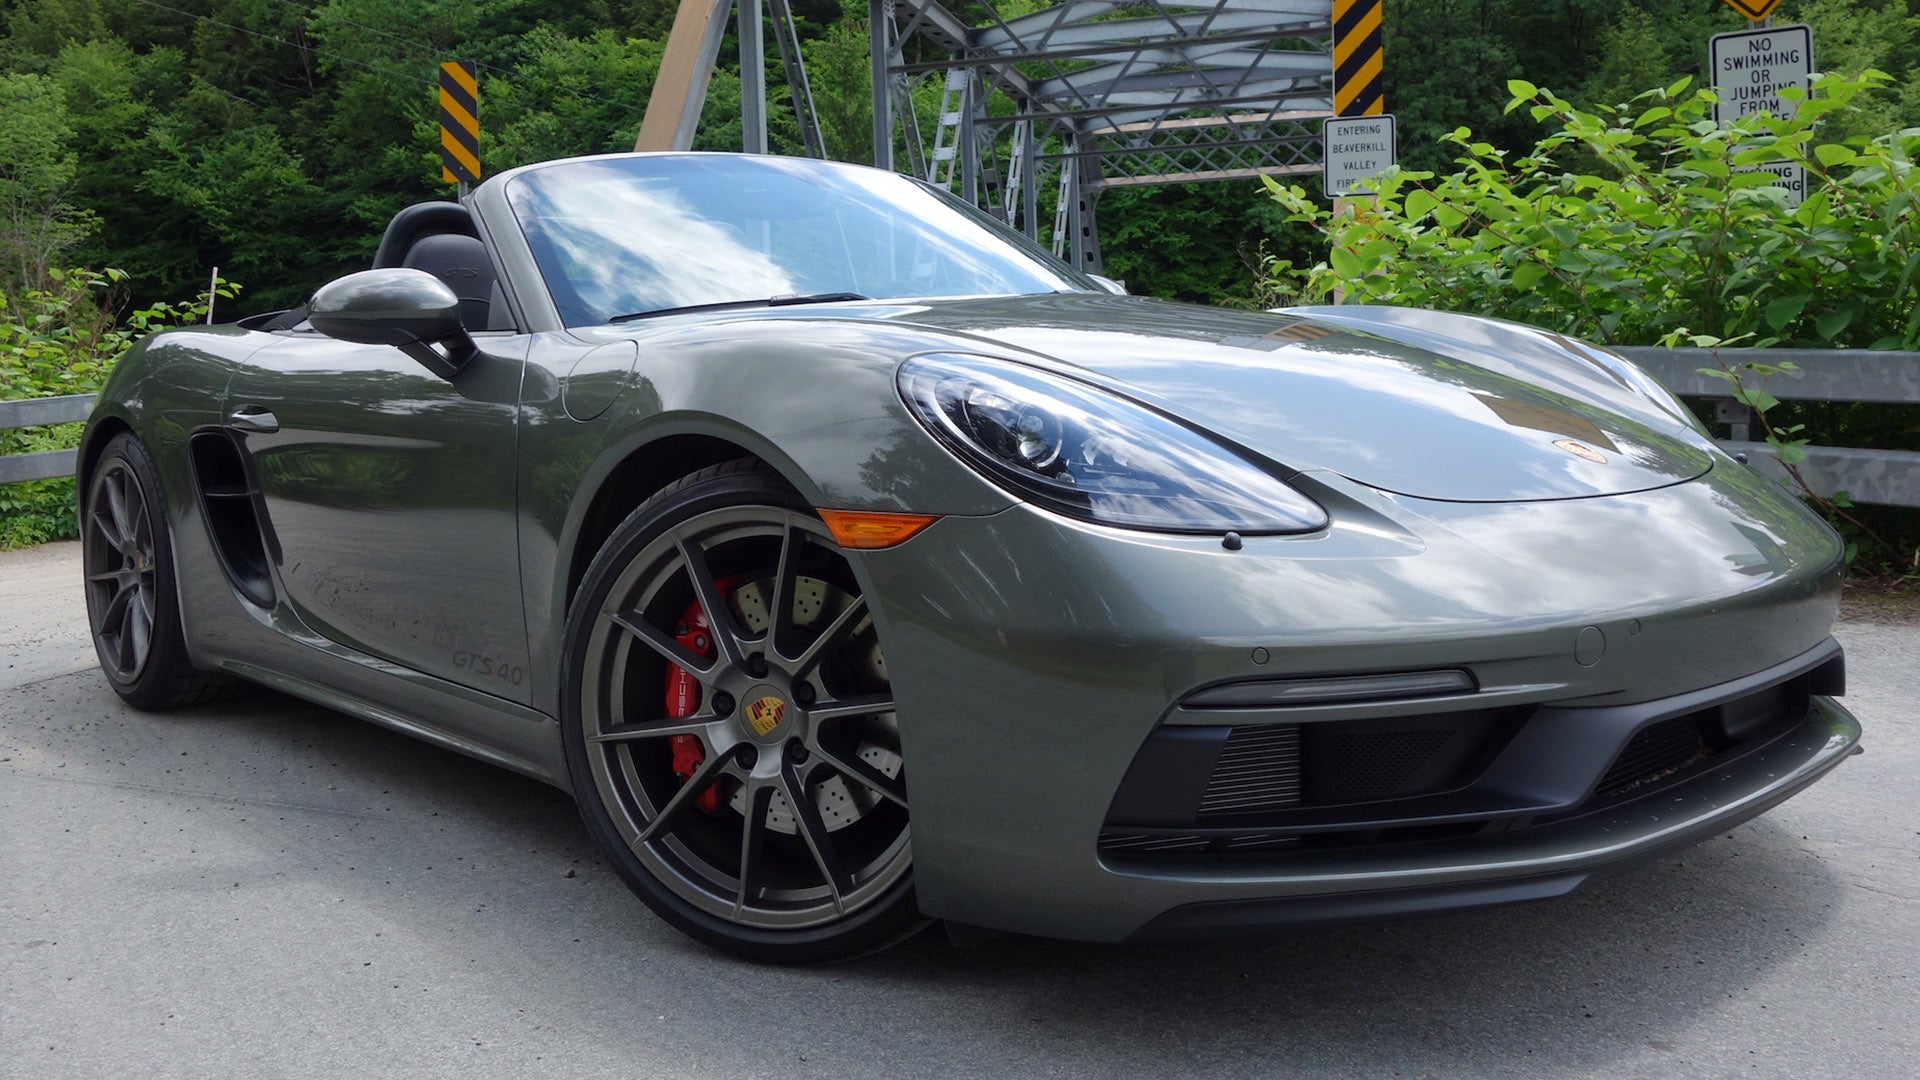 21 Porsche 718 Boxster Gts 4 0 Review The Very Best Of Now